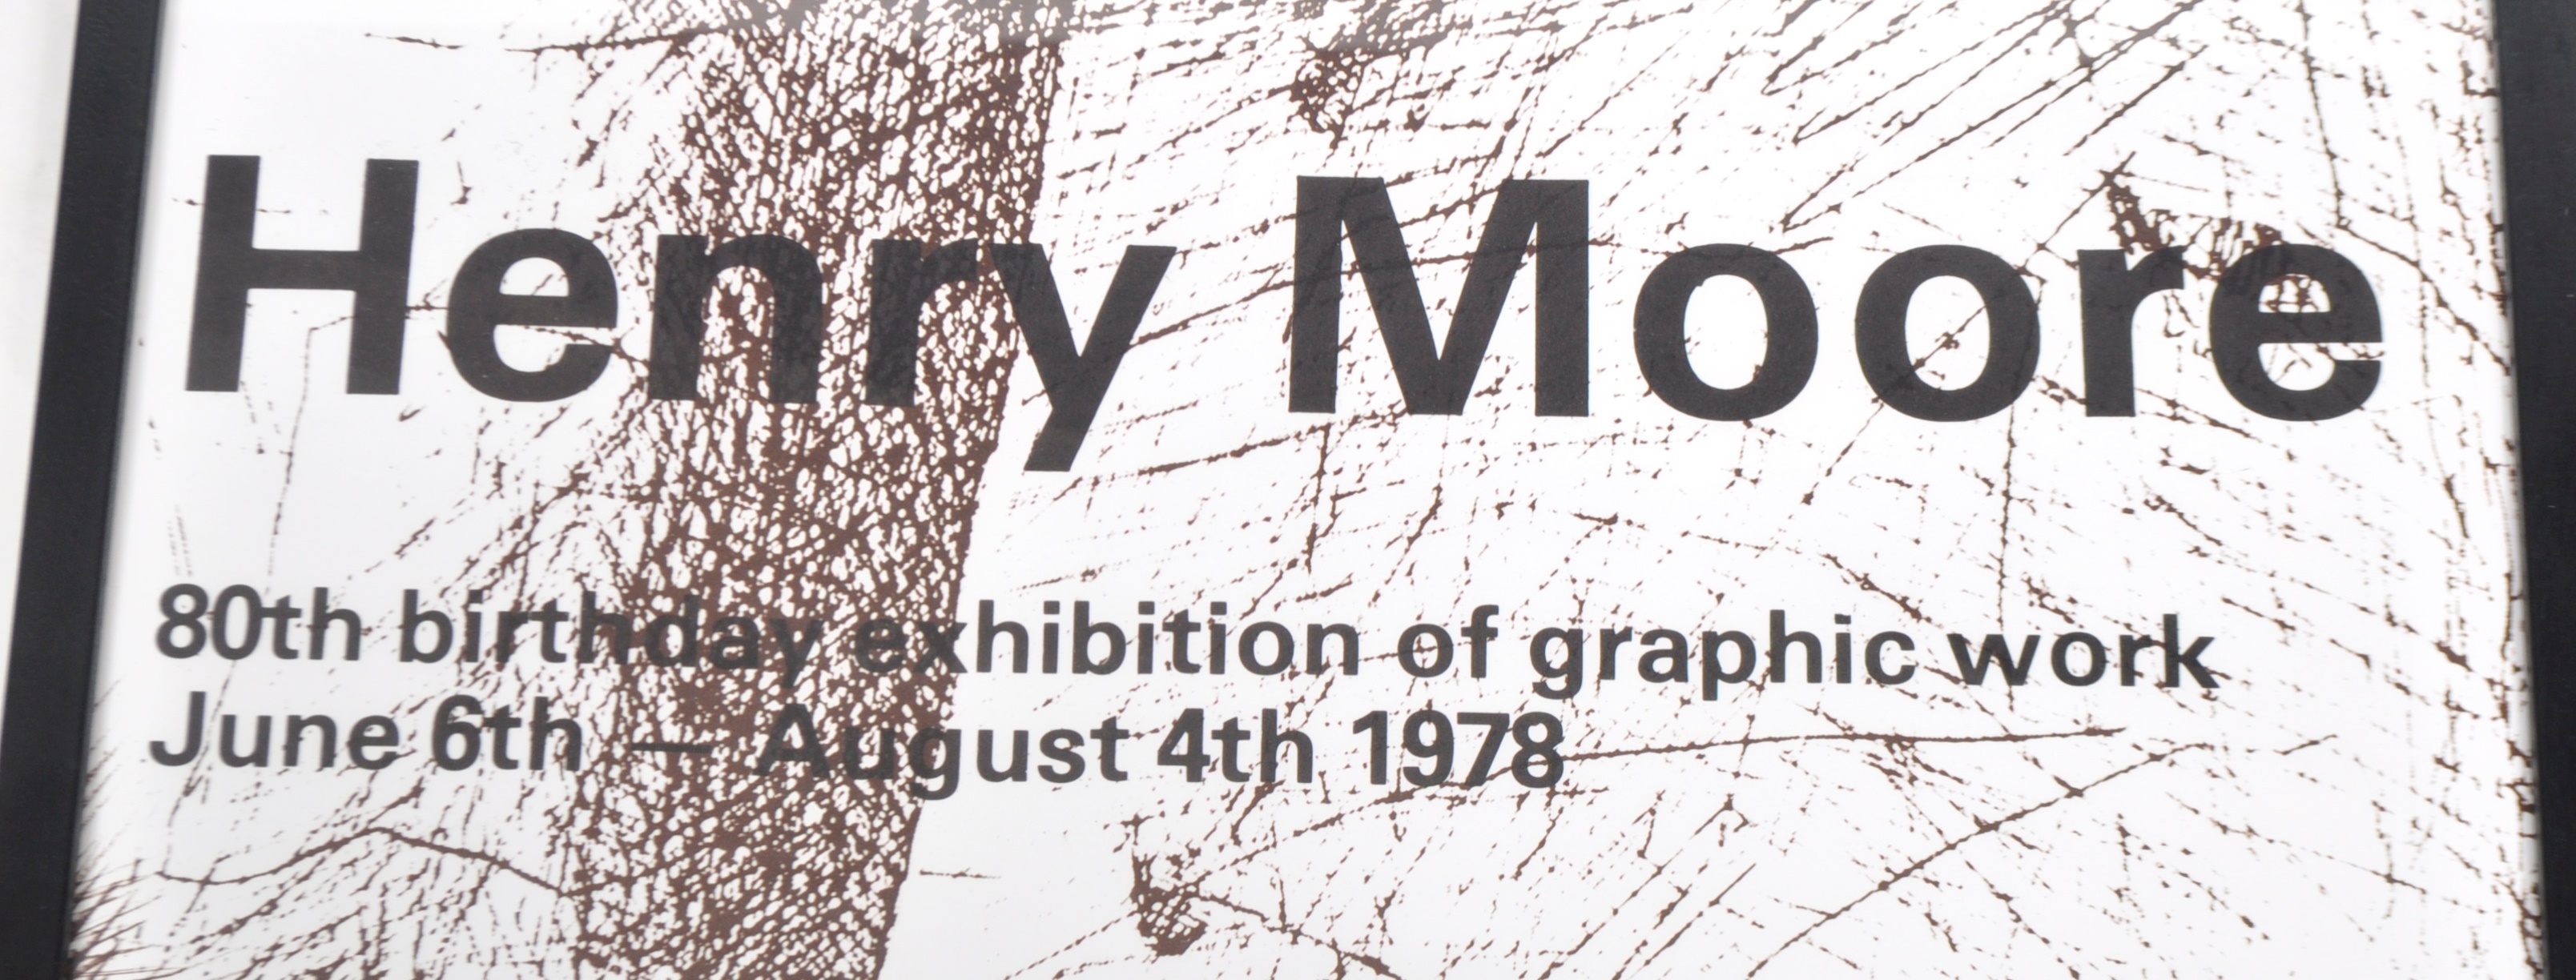 1970s GALLERY EXHIBITION POSTER FOR HENRY MOORE - Image 3 of 6